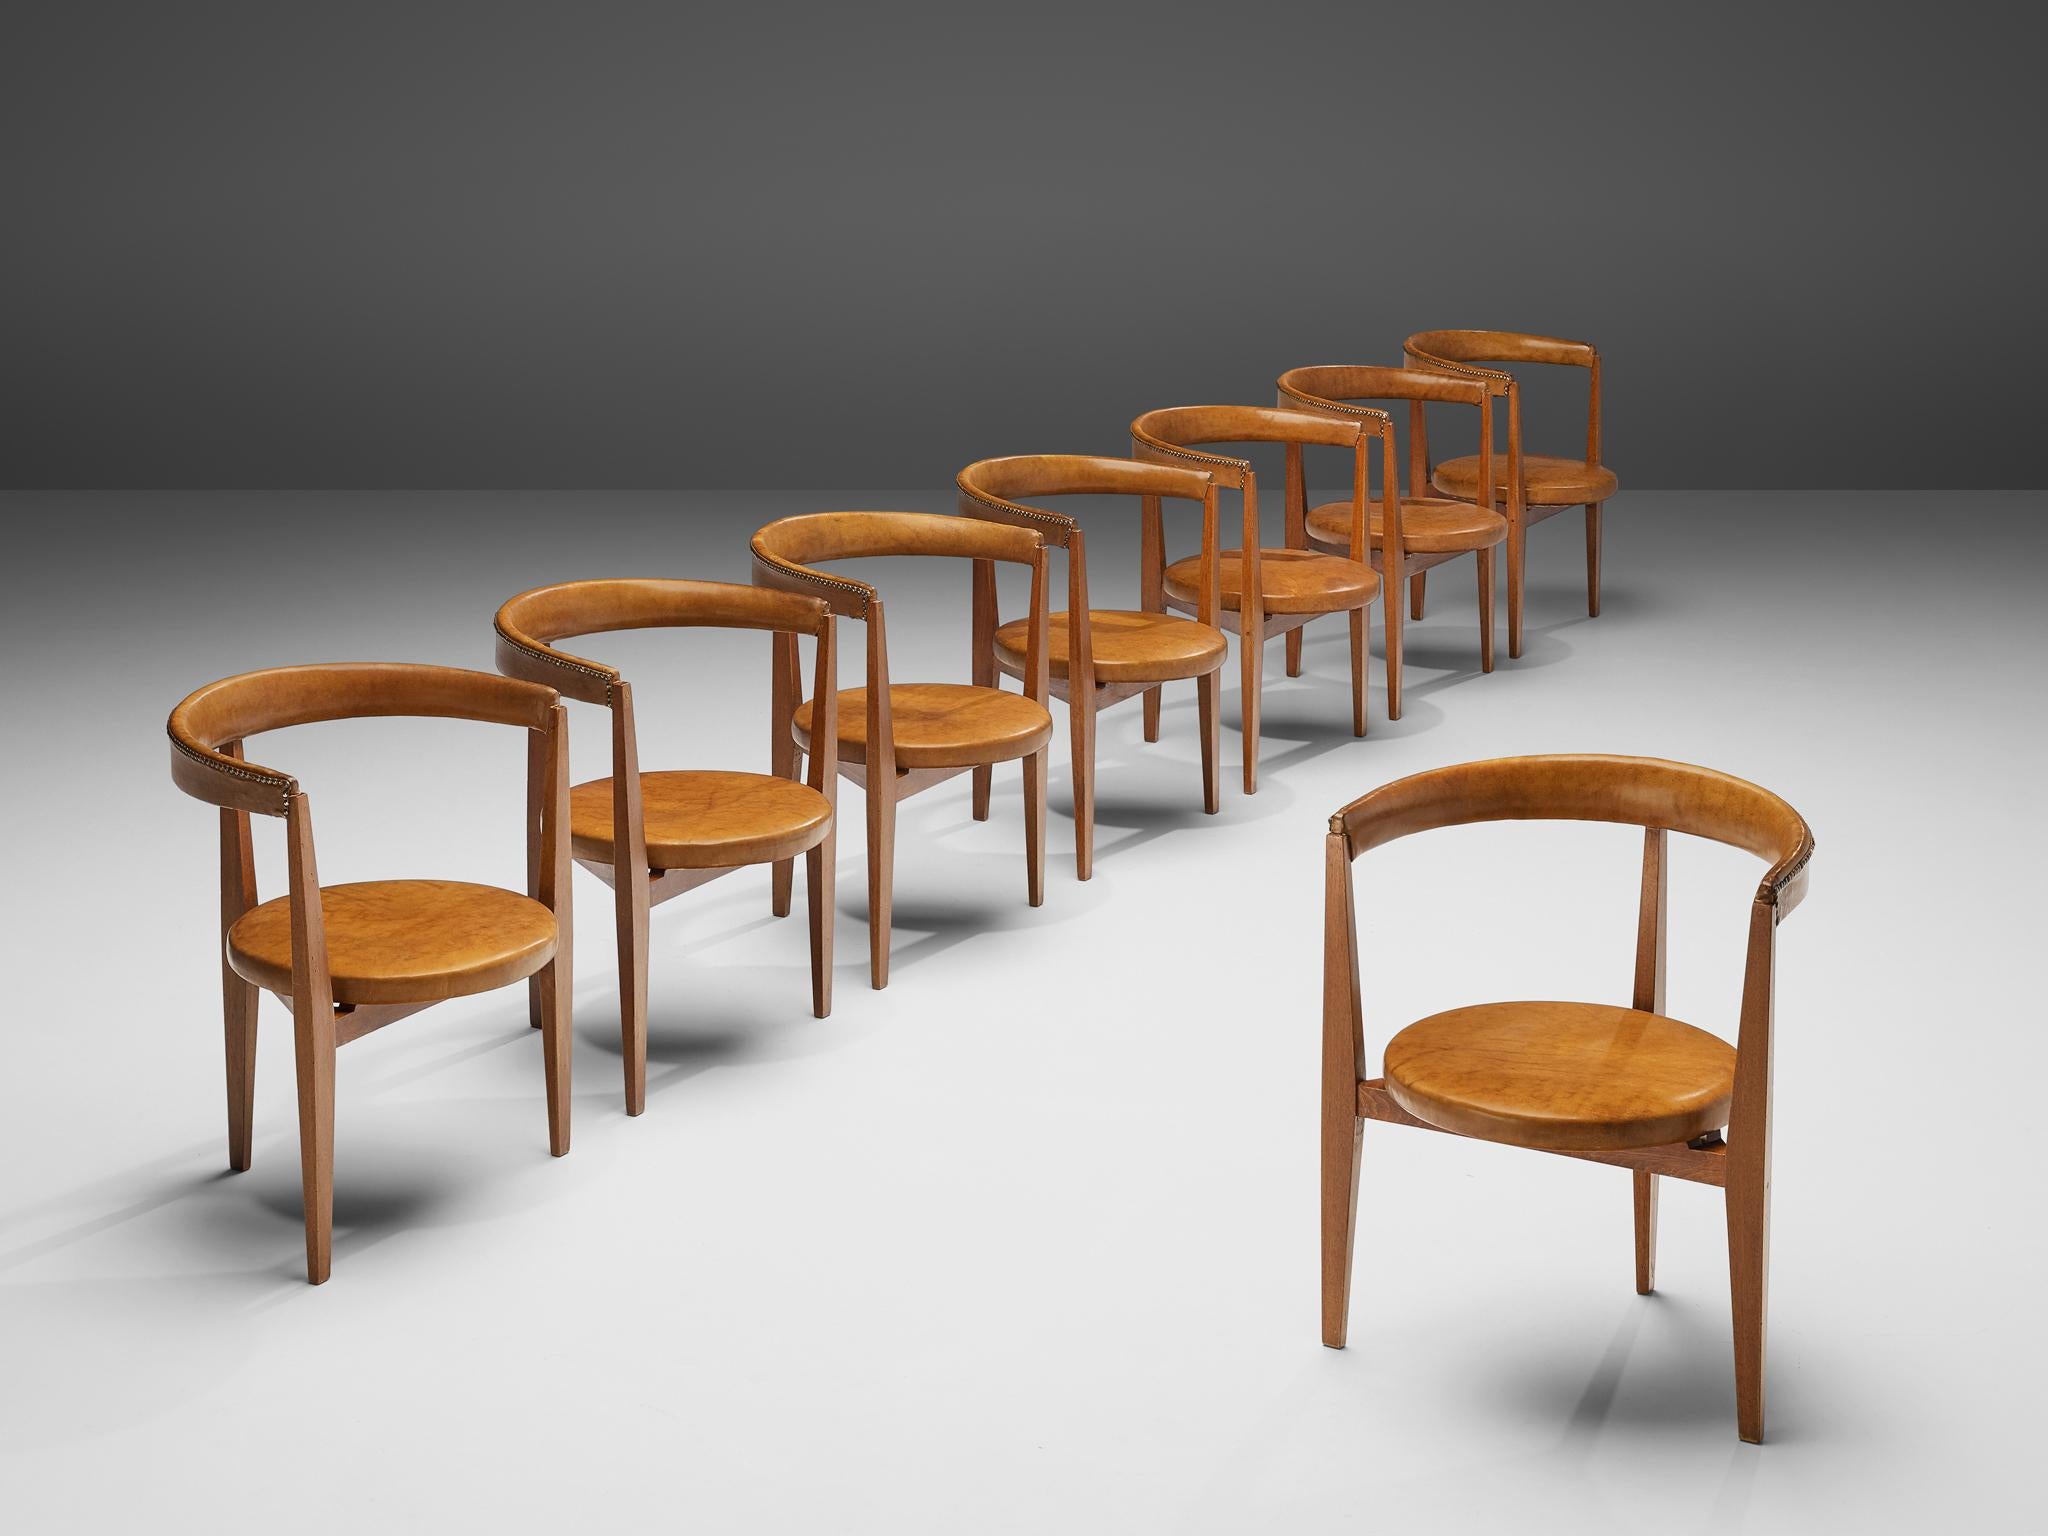 Guido Canali, set of eight dining chairs, walnut, leather, brass, Italy, 1960s

This set is one of the rare furniture designs of architect Guido Canali (born 1935). The chairs, designed by Canali at the early stages of his career, were inspired by